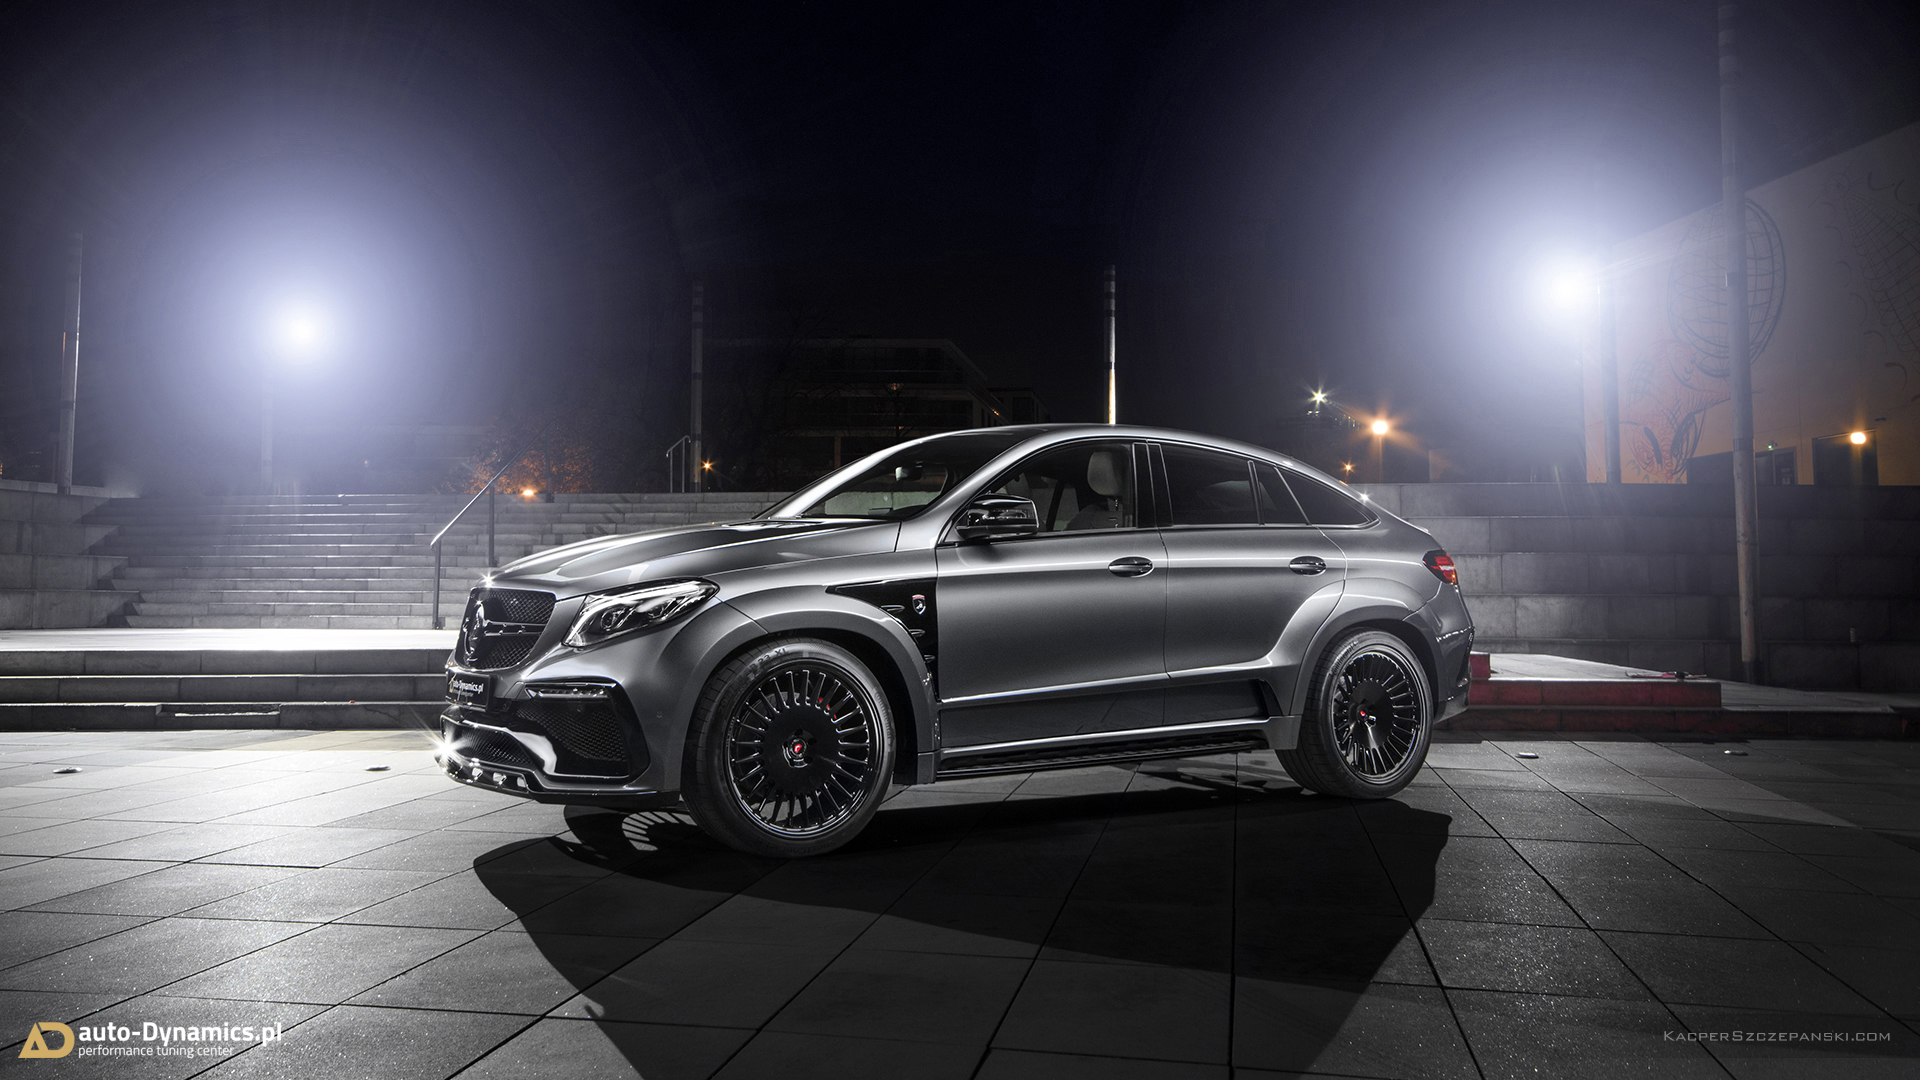 Mercedes Amg Gle 63 S Coupe Pumped To 795 Hp Hits 62 Mph In 3 25 Sec Carscoops